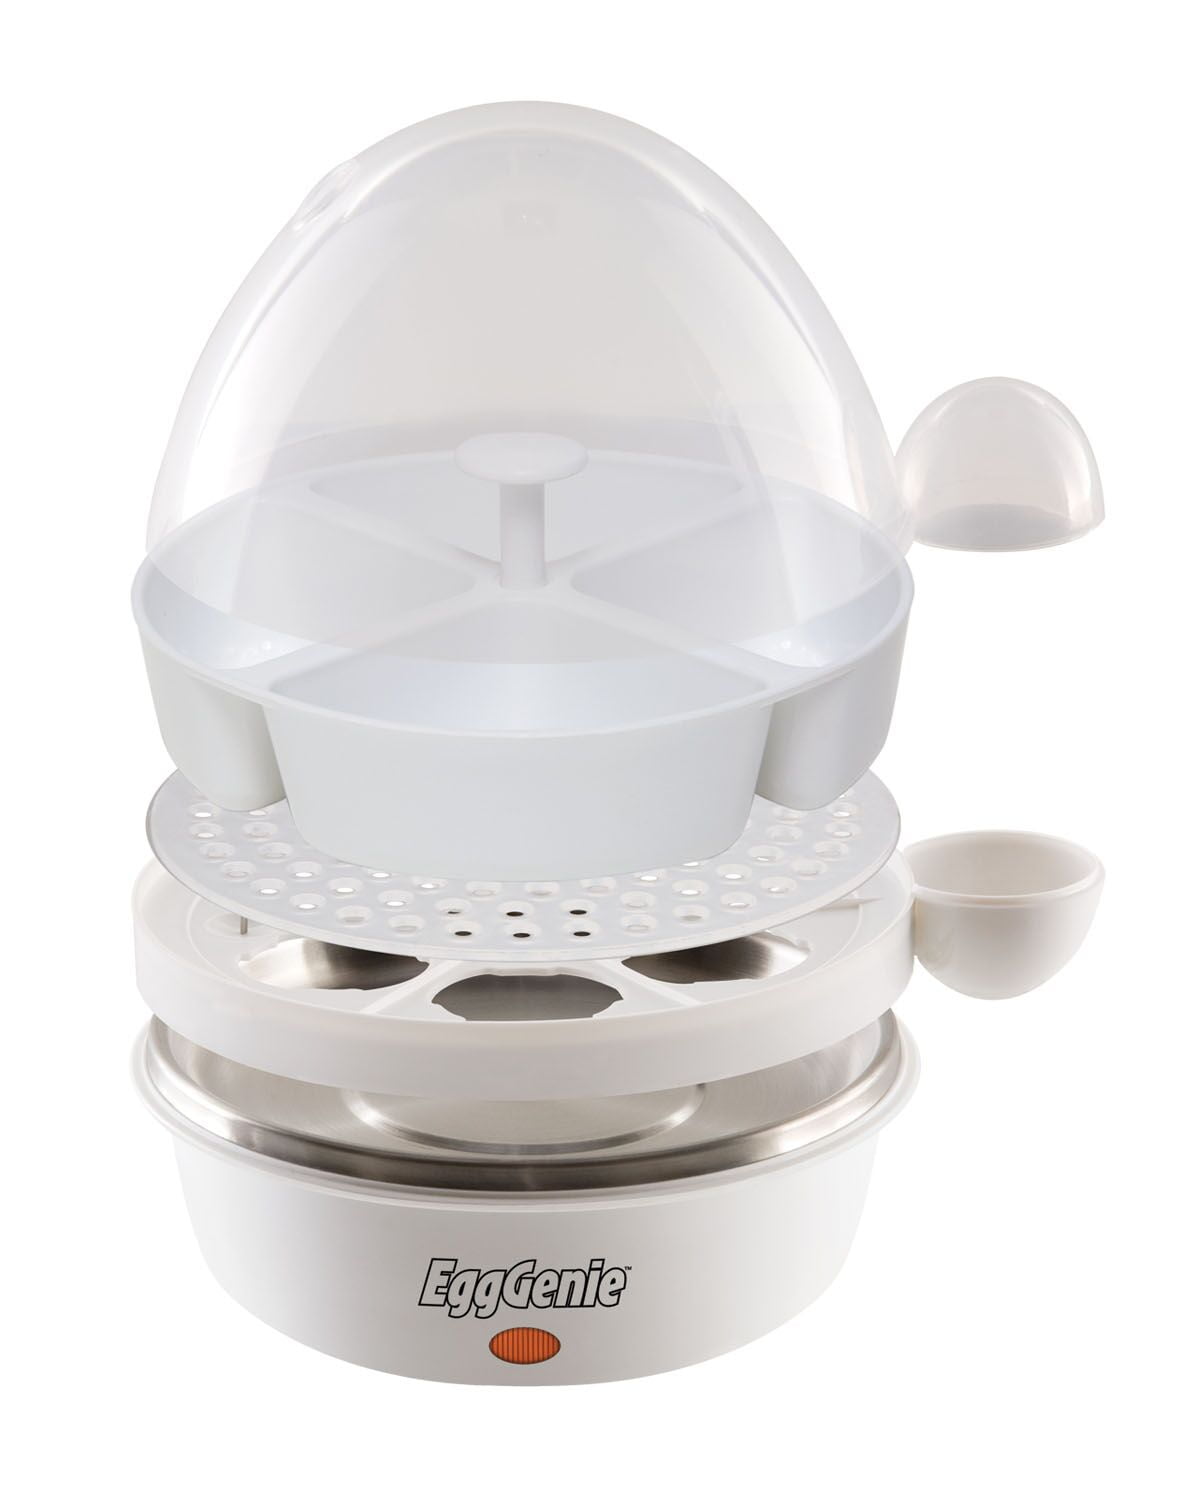 Why I May or Not be a Huge Fan of the Egg Cooker, Honestly